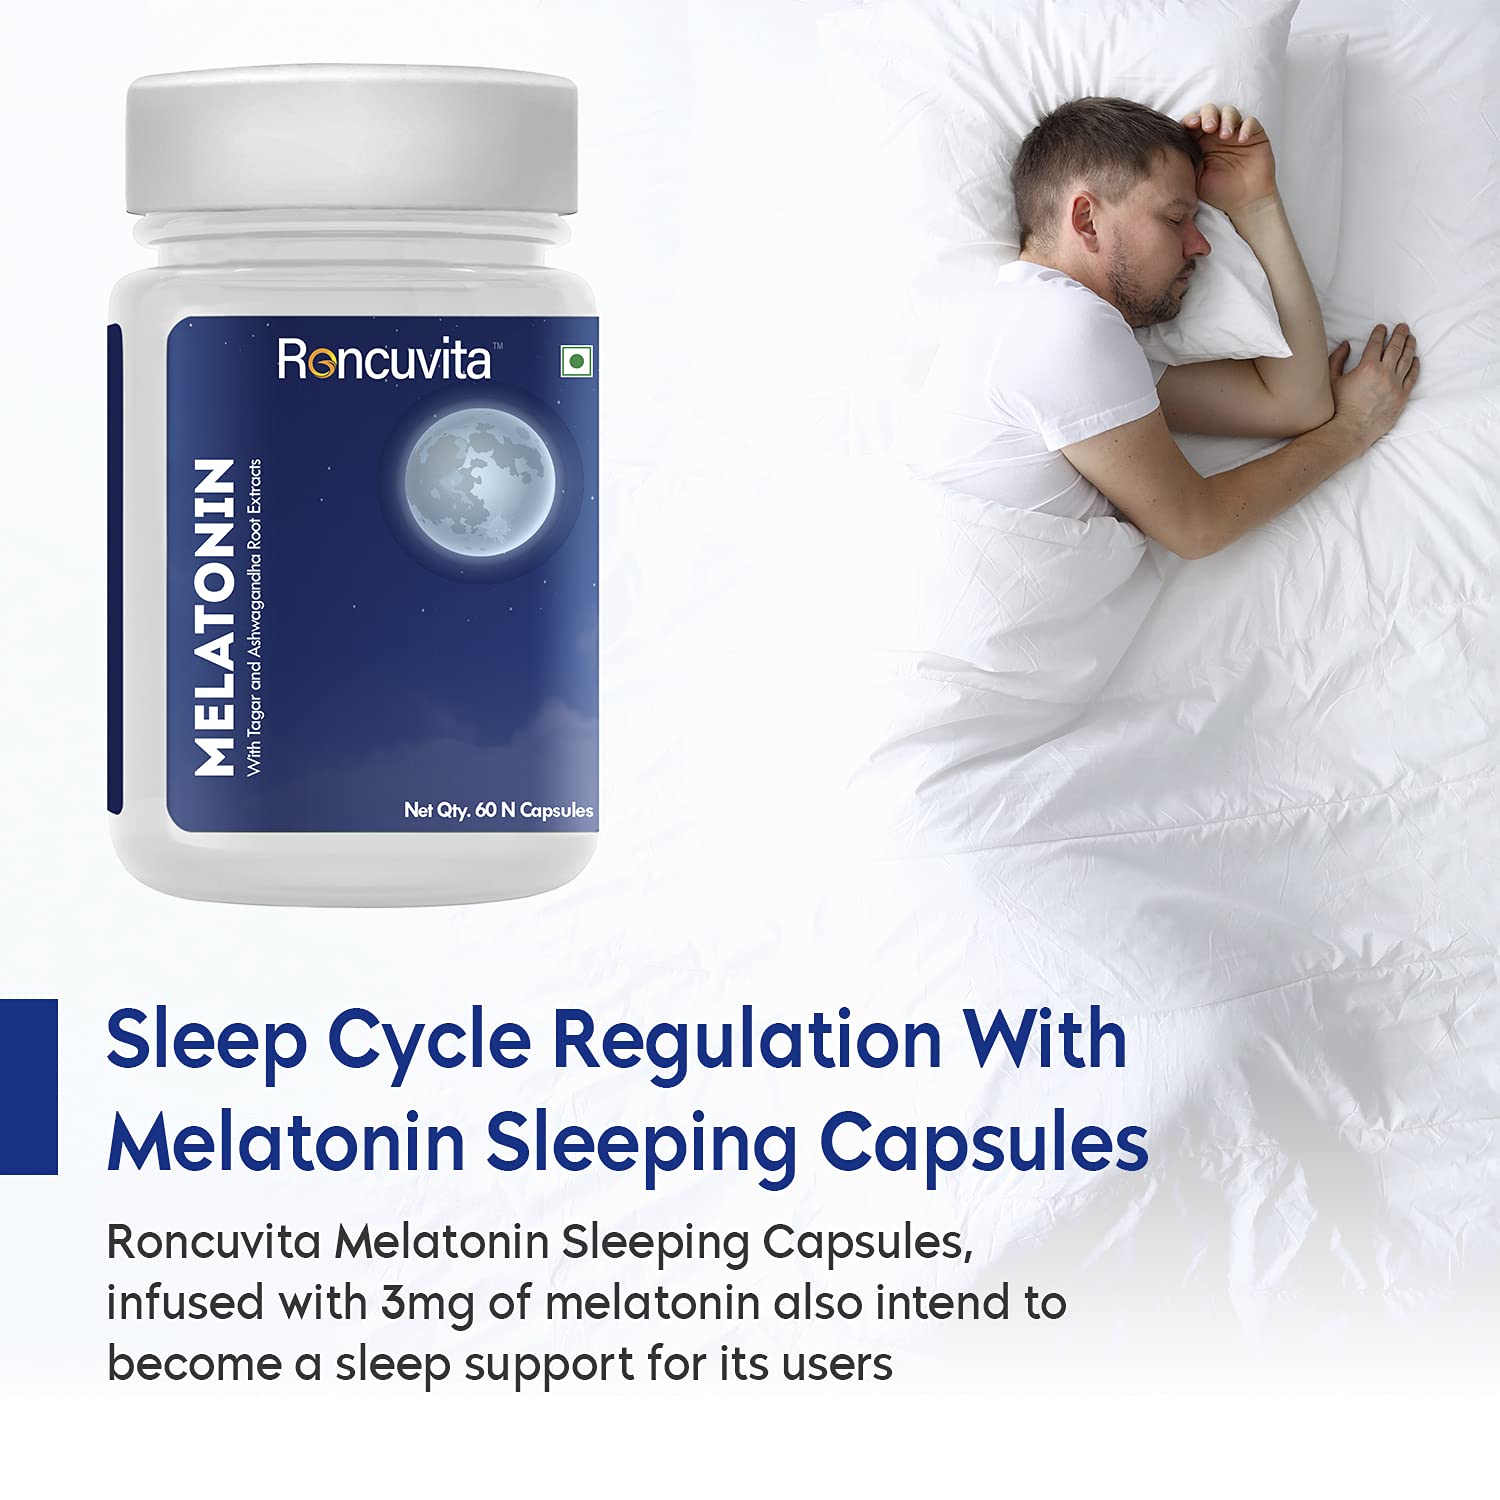 The amount Melatonin 10mg is Too Much (Review) 2021